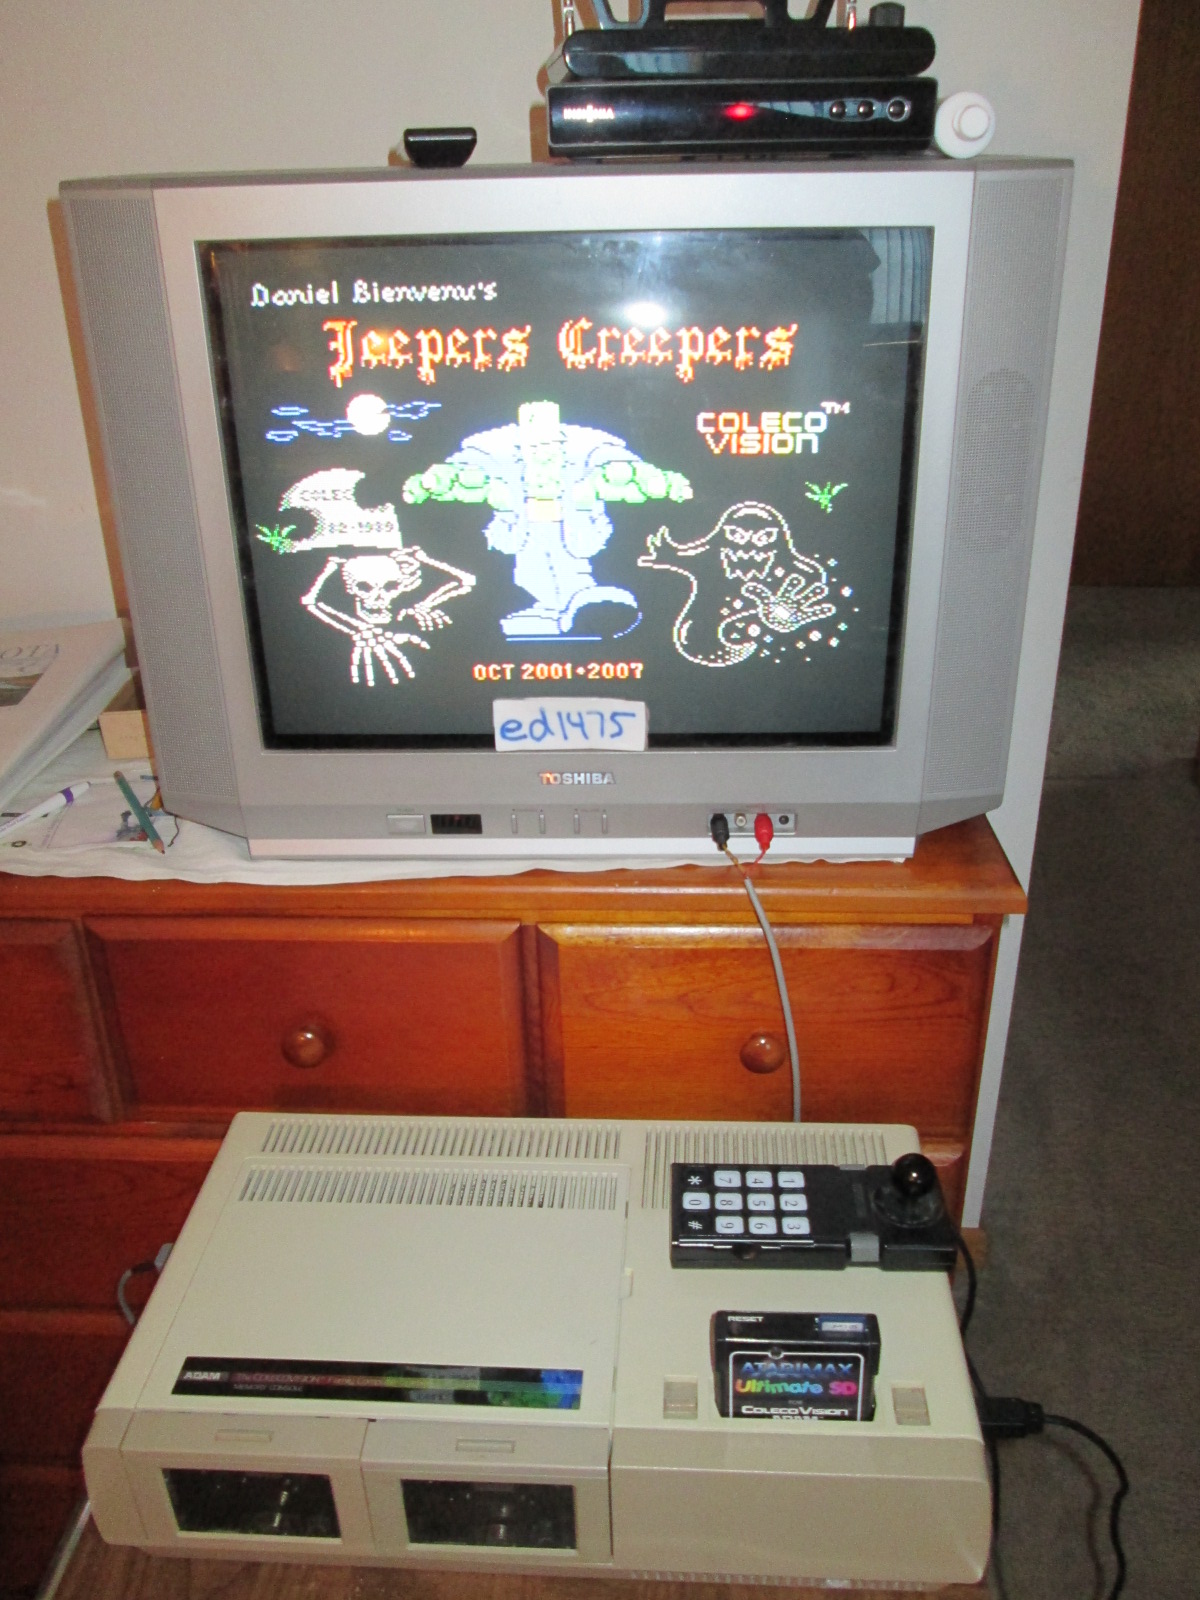 ed1475: Jeepers Creepers (Colecovision) 11,820 points on 2017-10-26 16:28:44